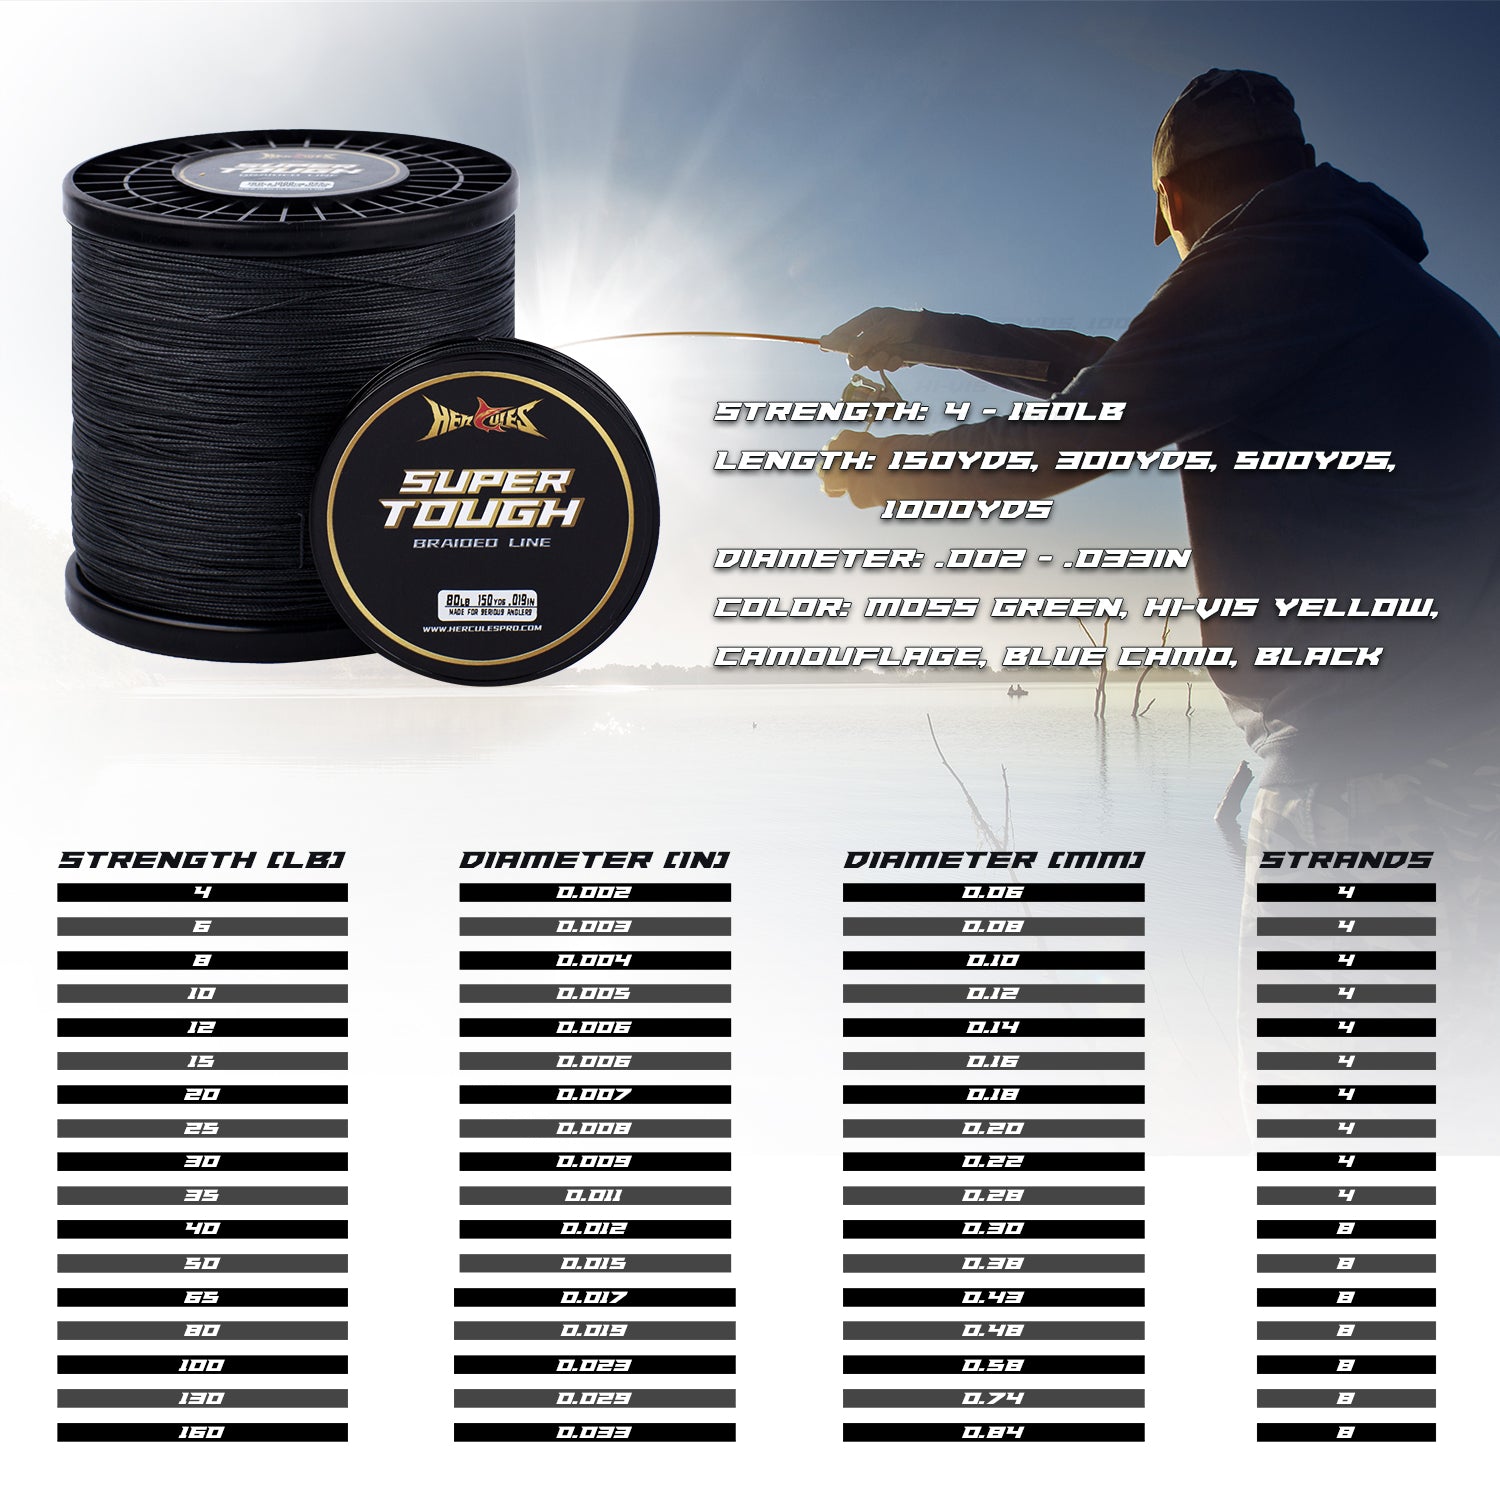 Grianlook 300M Fishing Line Abrasion-assistant Fish Wire Nylon Braided  Outdoor Black 1.0/15LB 